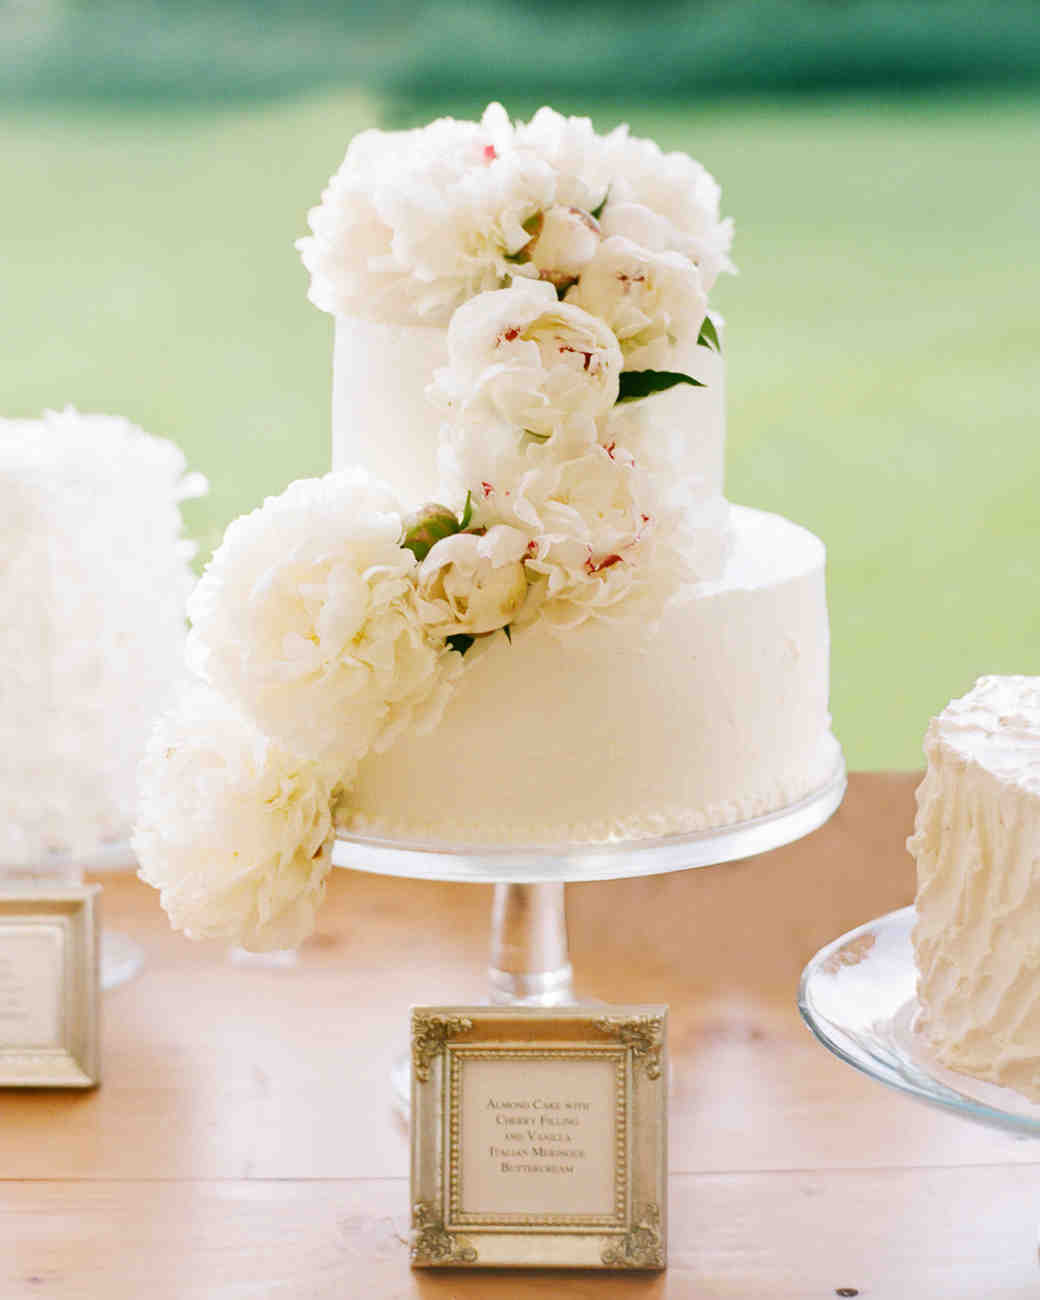 Spring Wedding Cakes
 Spring Wedding Cakes That Are Almost Too Pretty to Eat